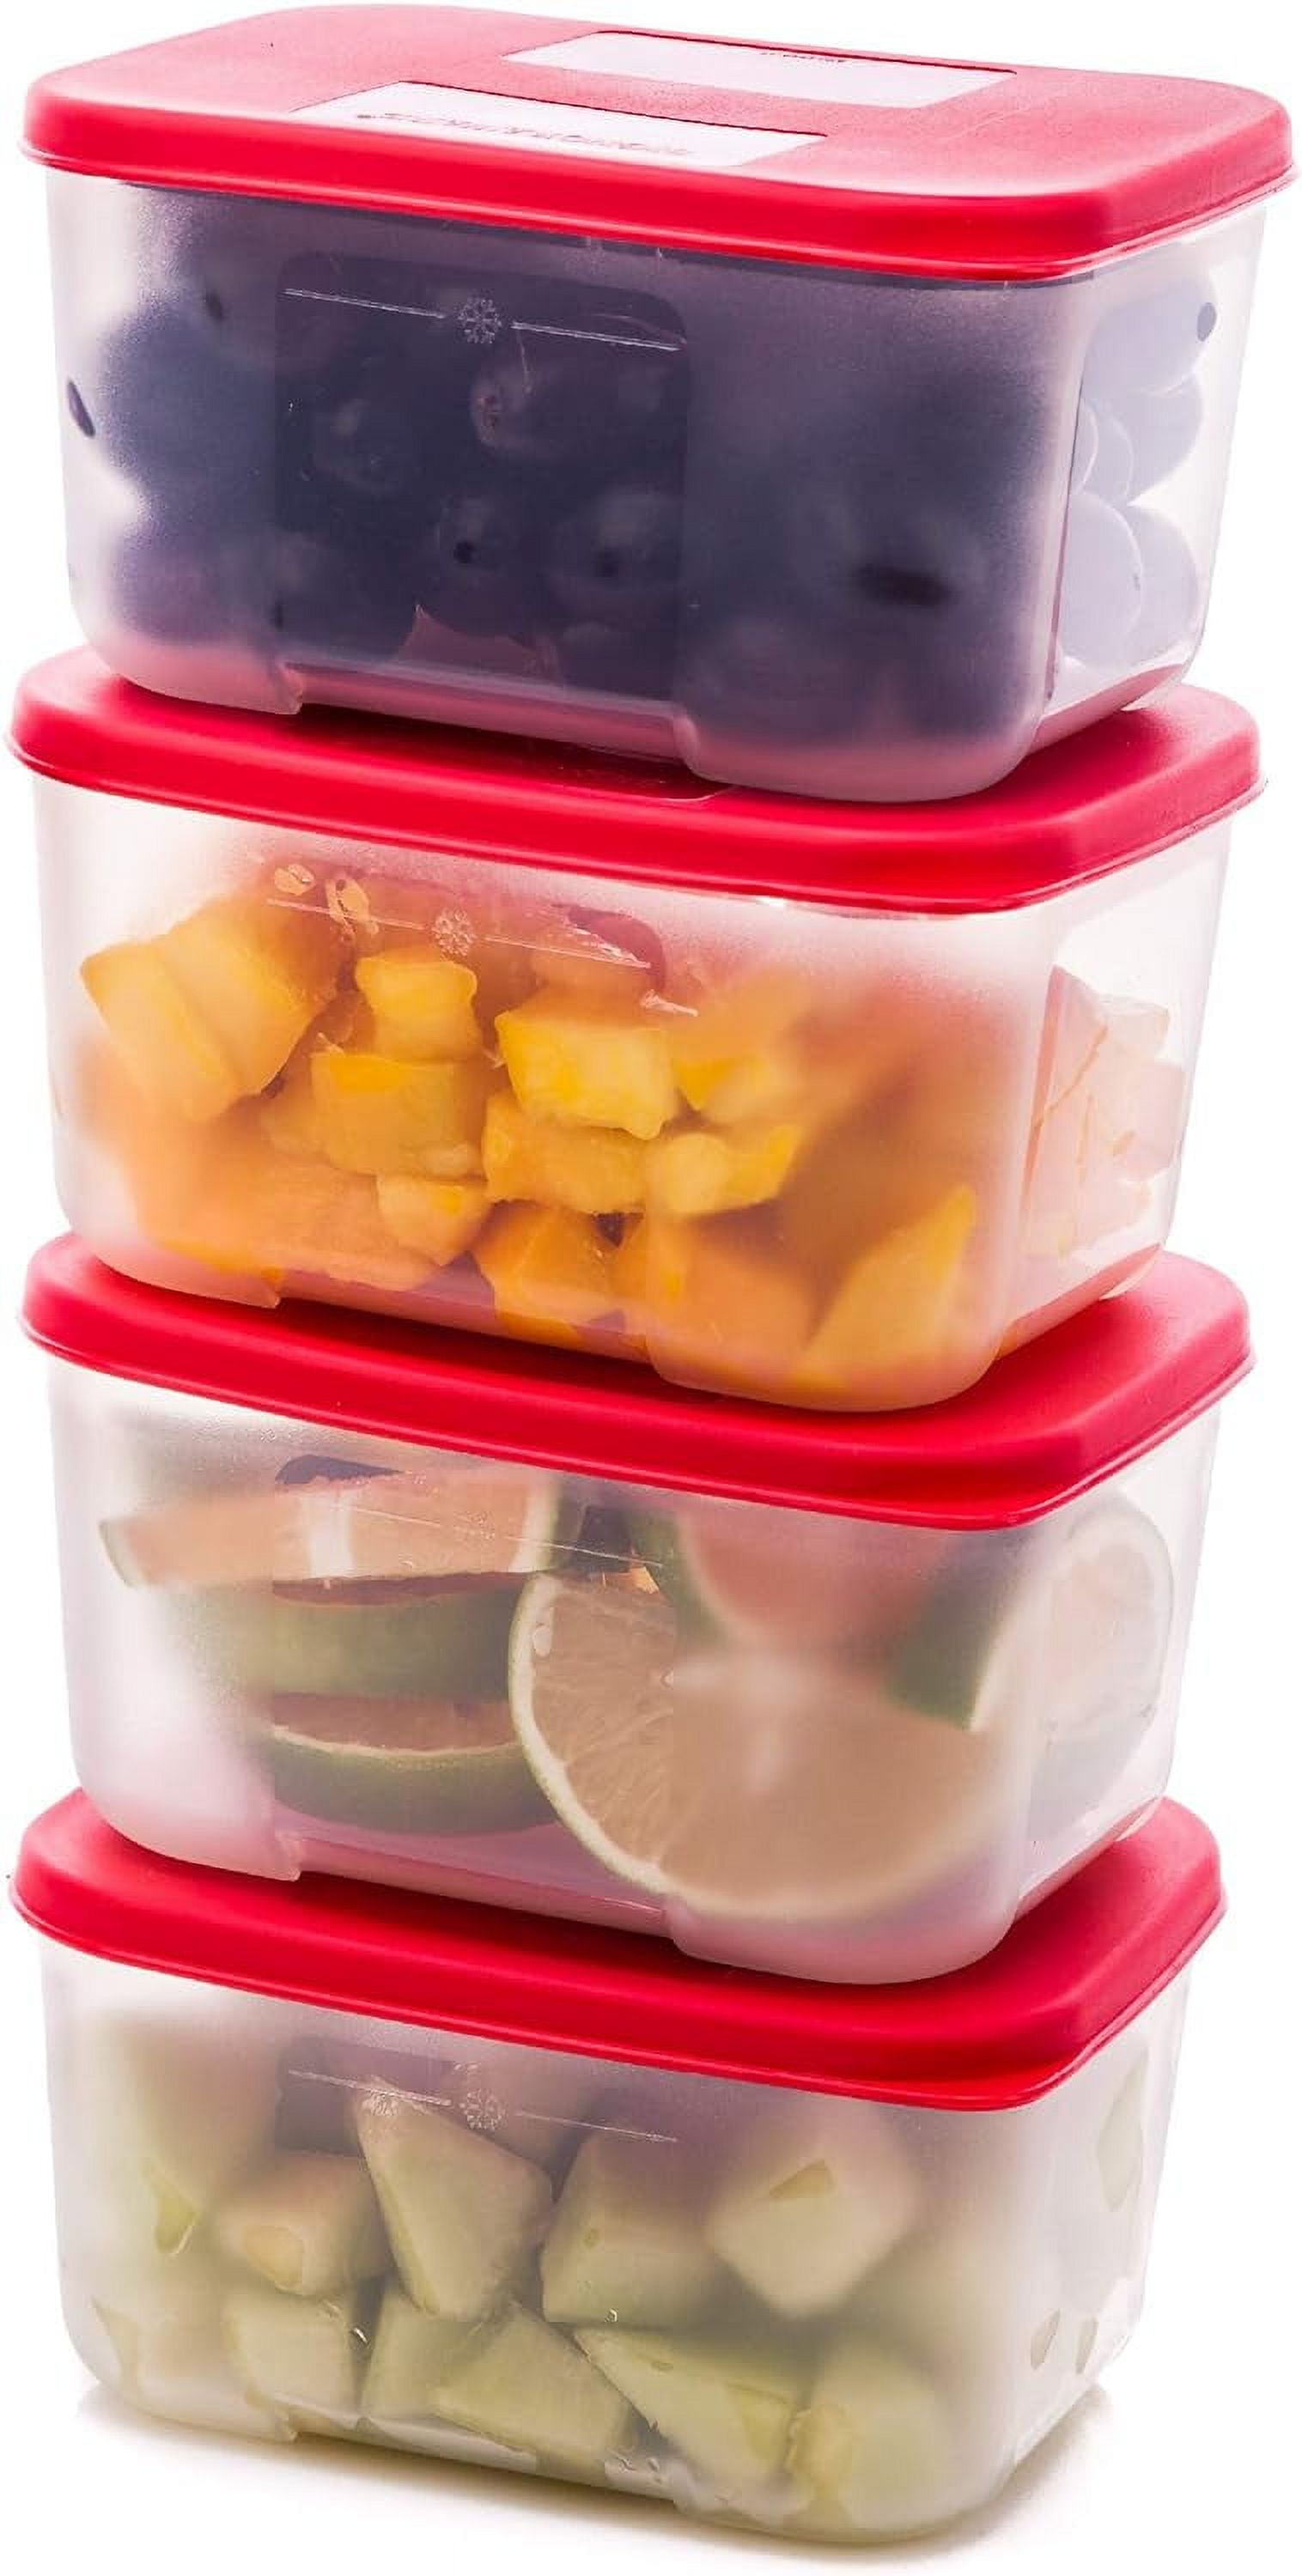 5 Best Freezer Containers for Better Leftovers